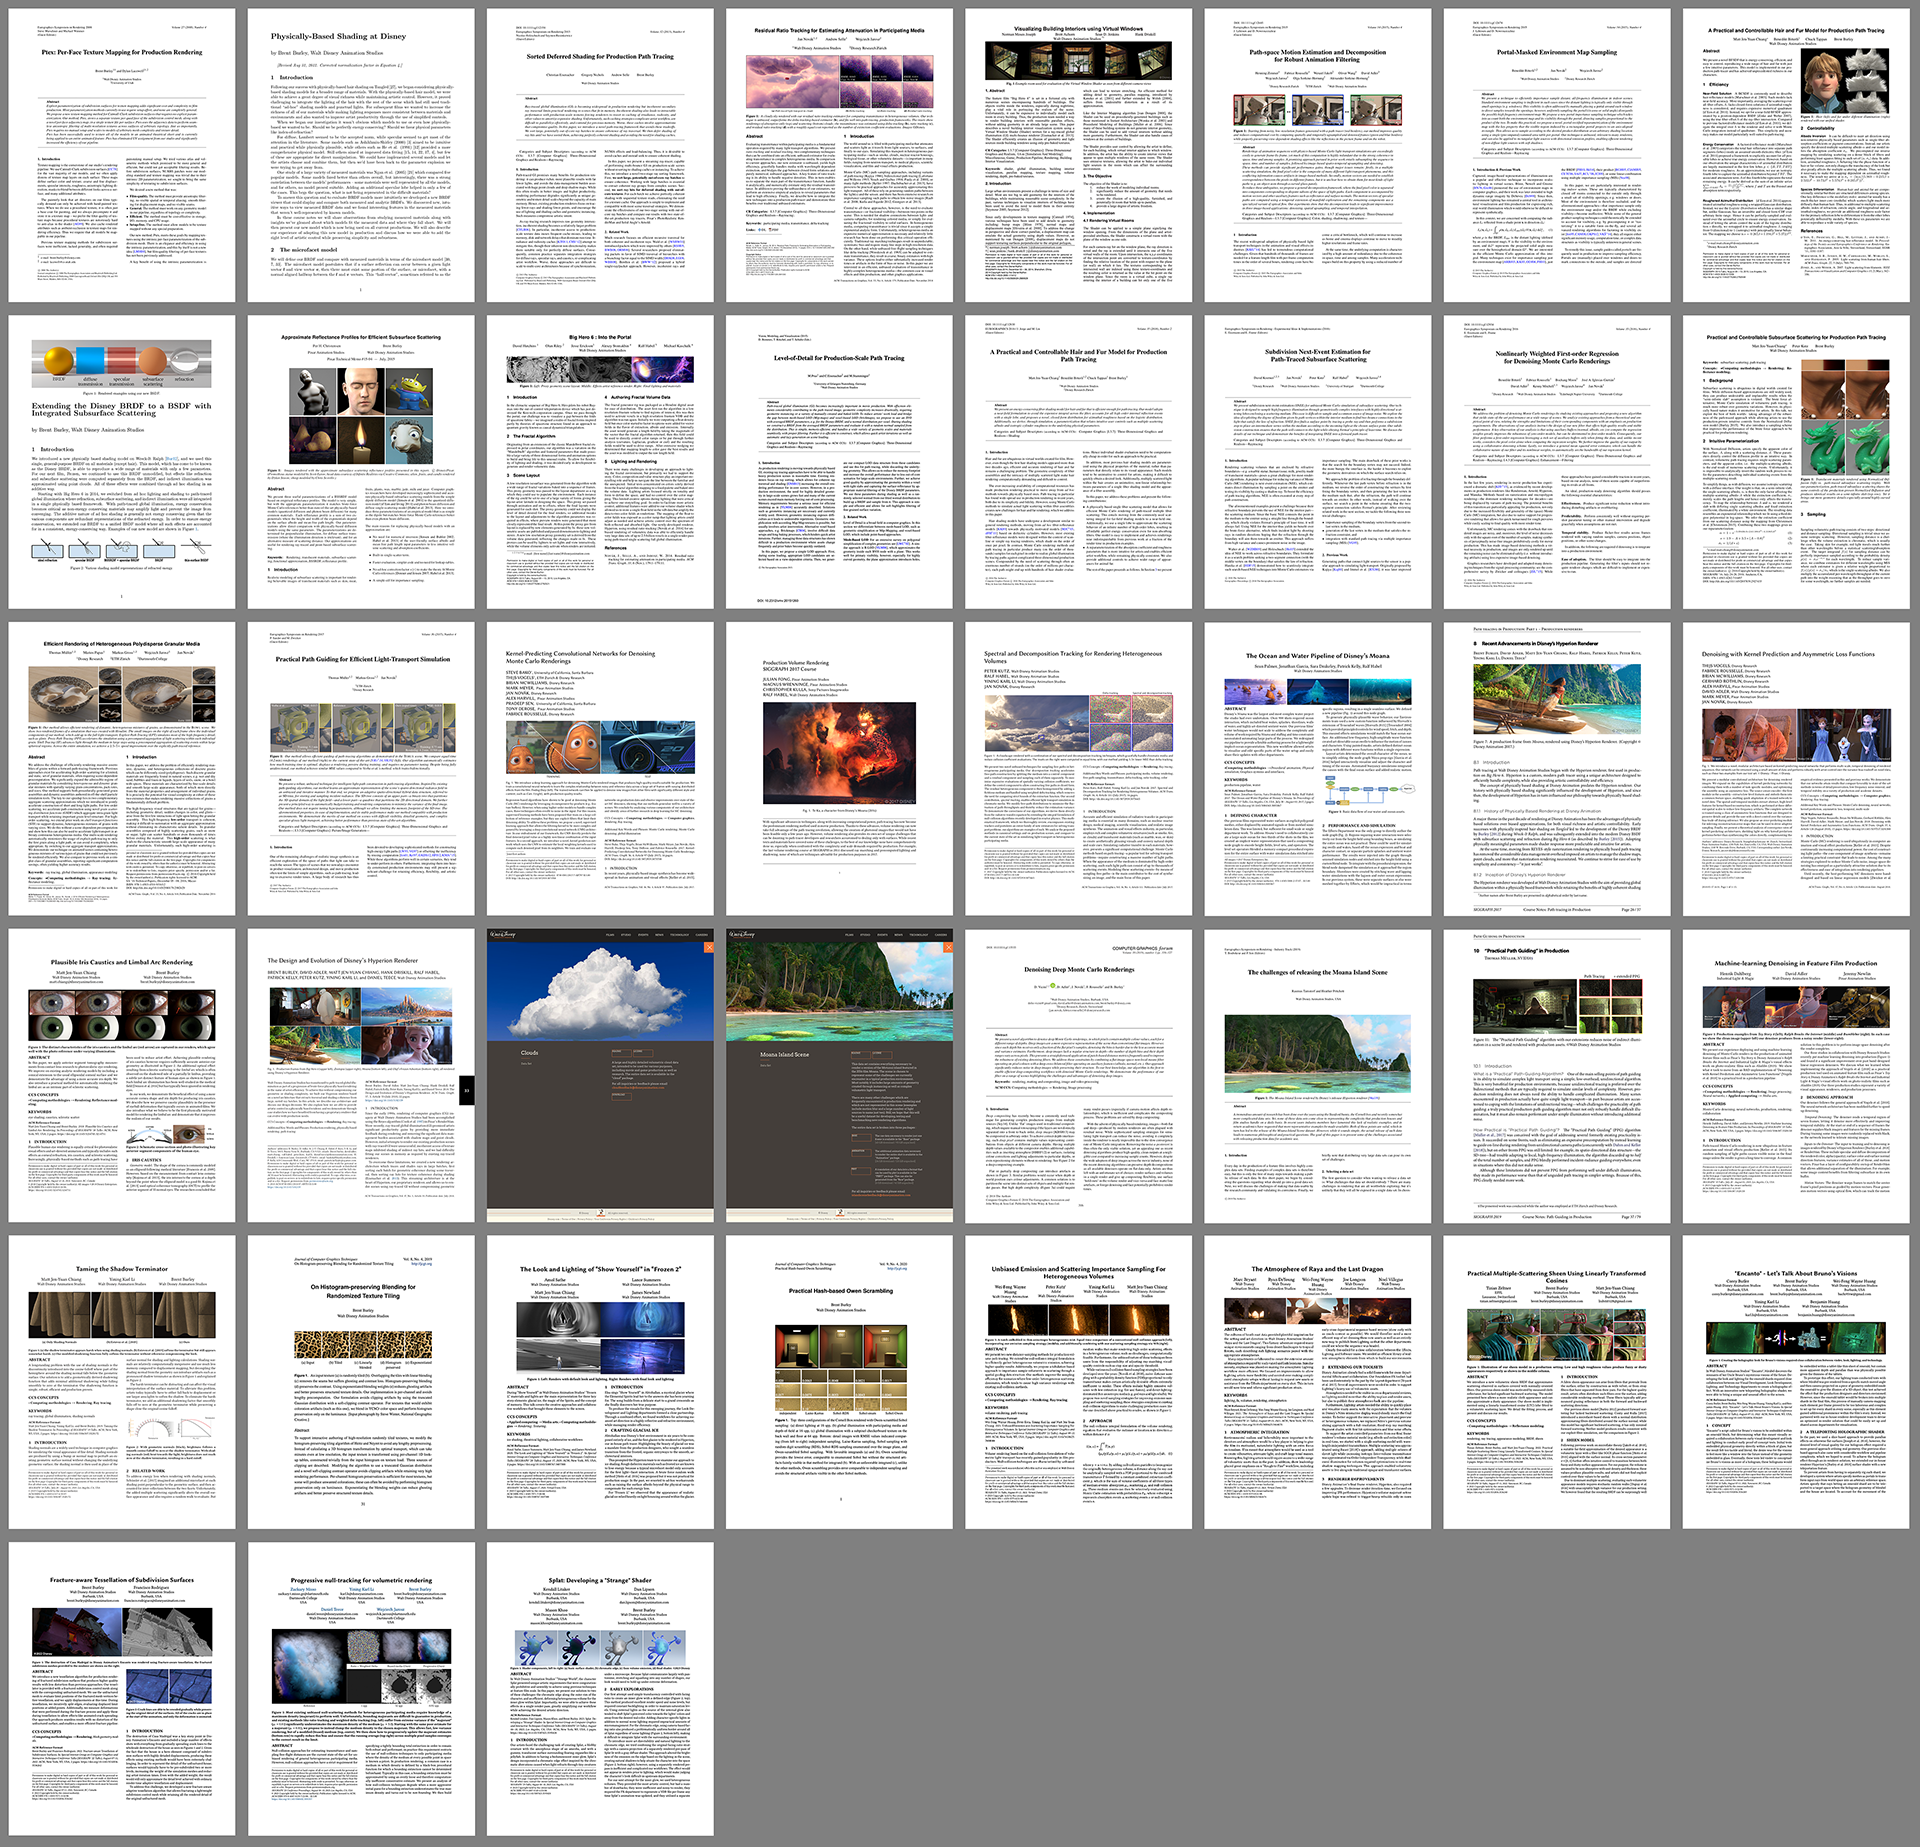 Figure 1: Previews of the first page of every Hyperion-related publication from Disney Animation, Disney Research Studios, and other research partners.